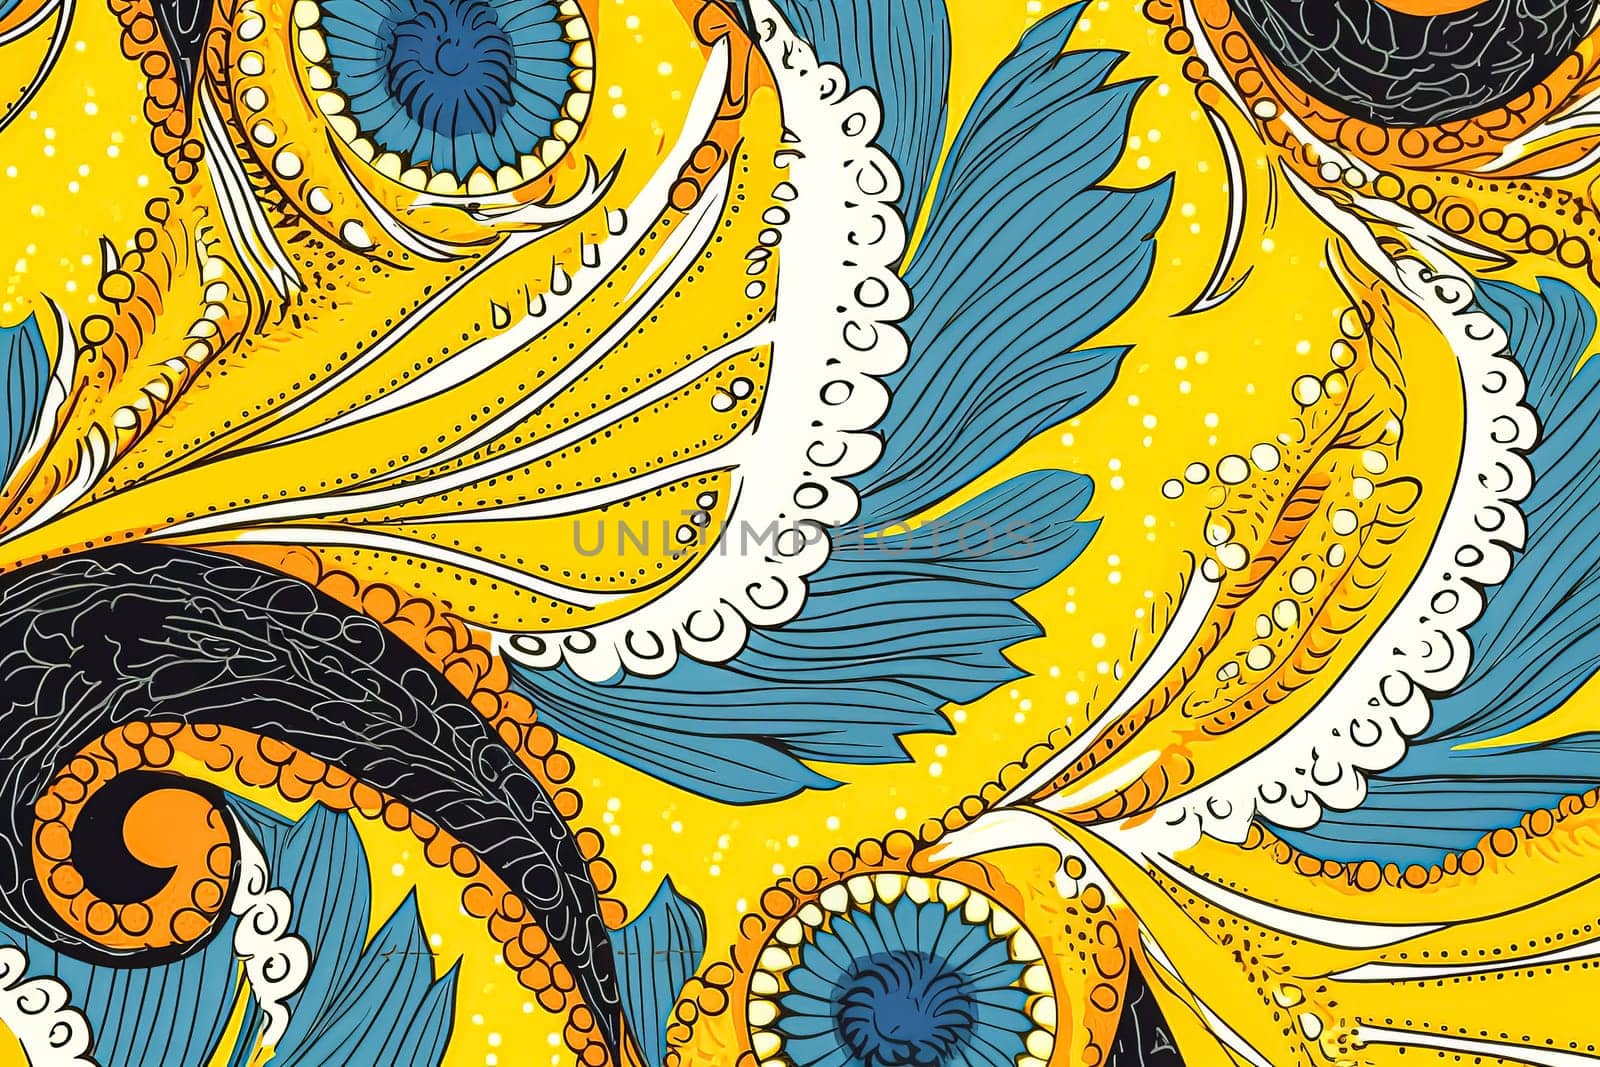 Seamless African motif ethnic traditional pattern in beautiful yellow and blue colors. Perfect for fashion design, textiles, and decorative elements.